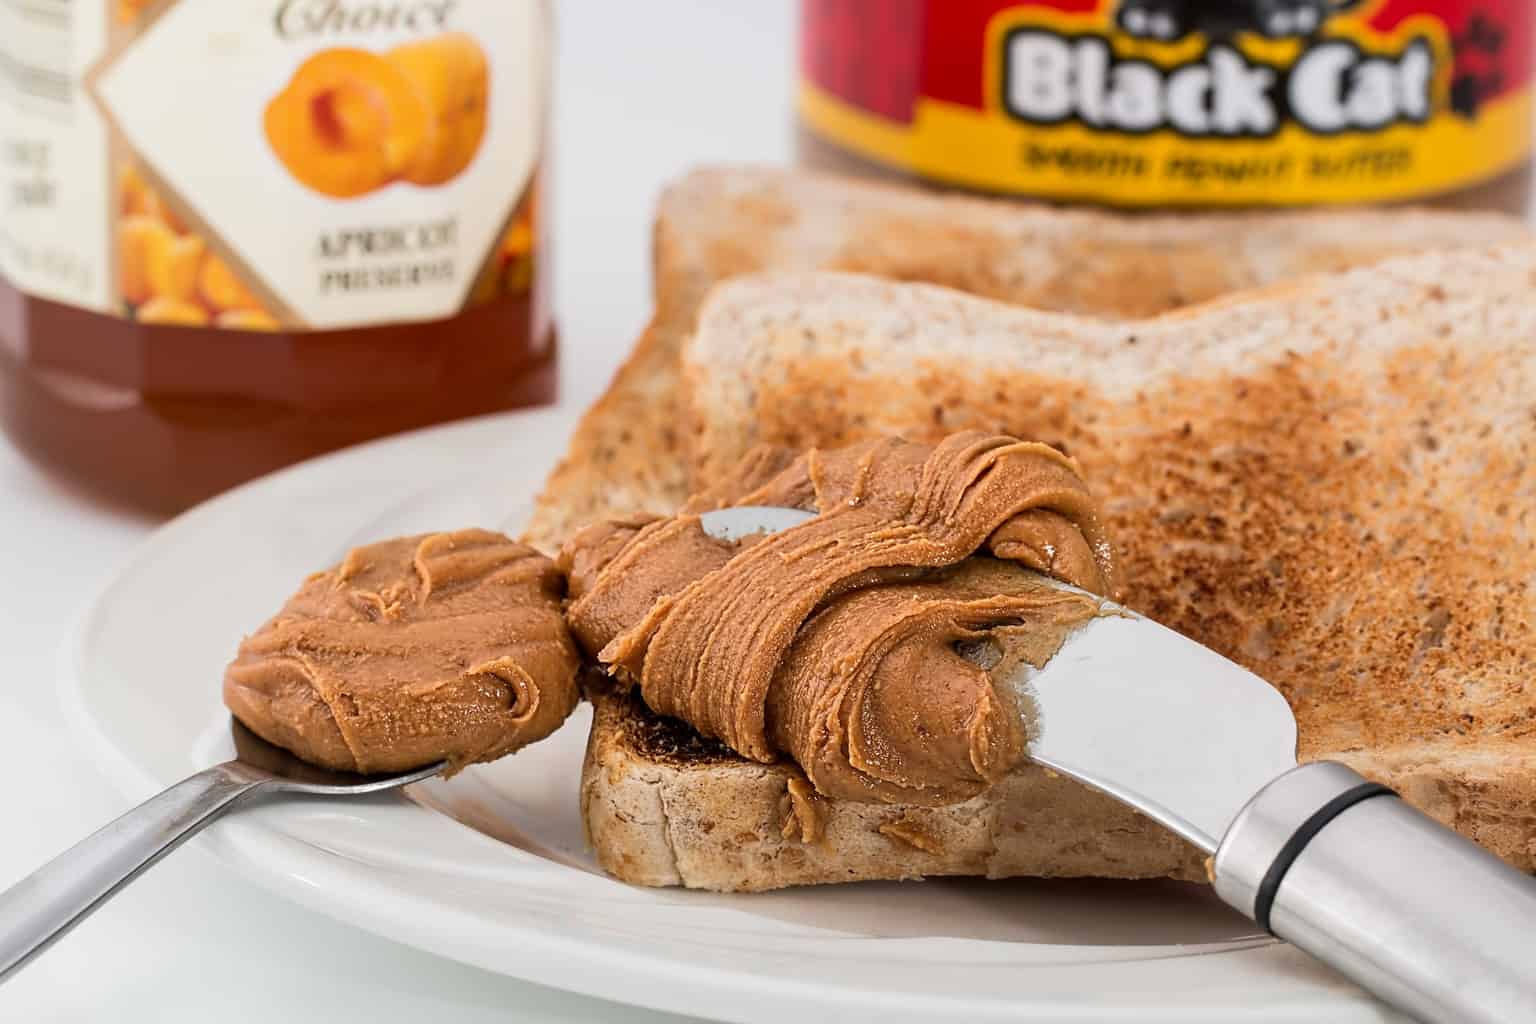 Can You Lose Weight by Eating Peanut Butter?